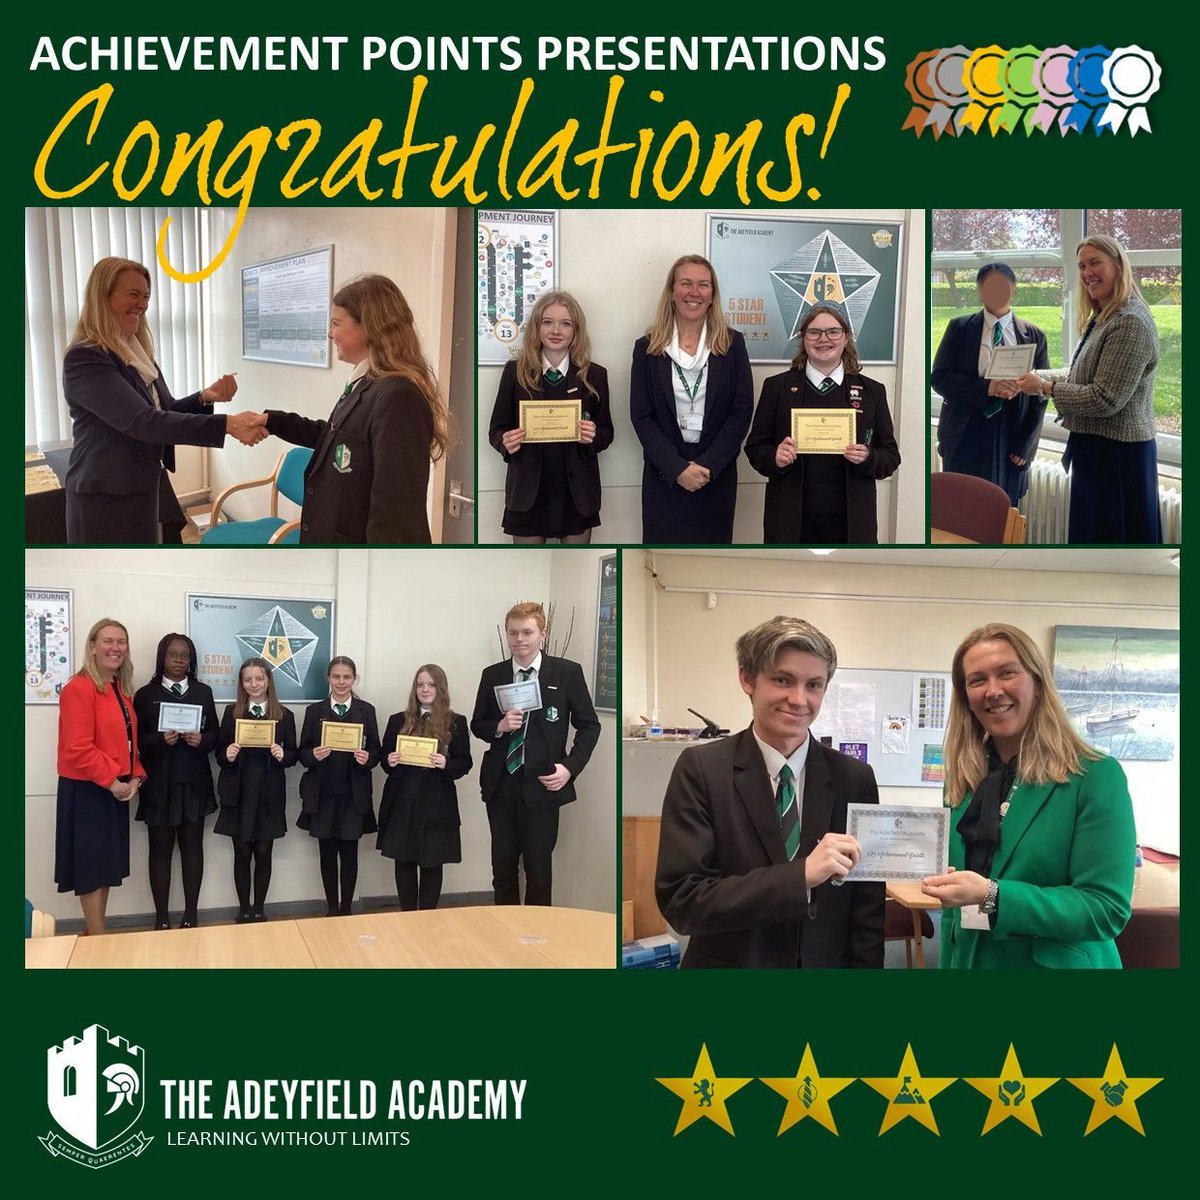 Congratulations to everyone who received a certificate for their achievements points this week having reached the next level on our scale. #5starstudents